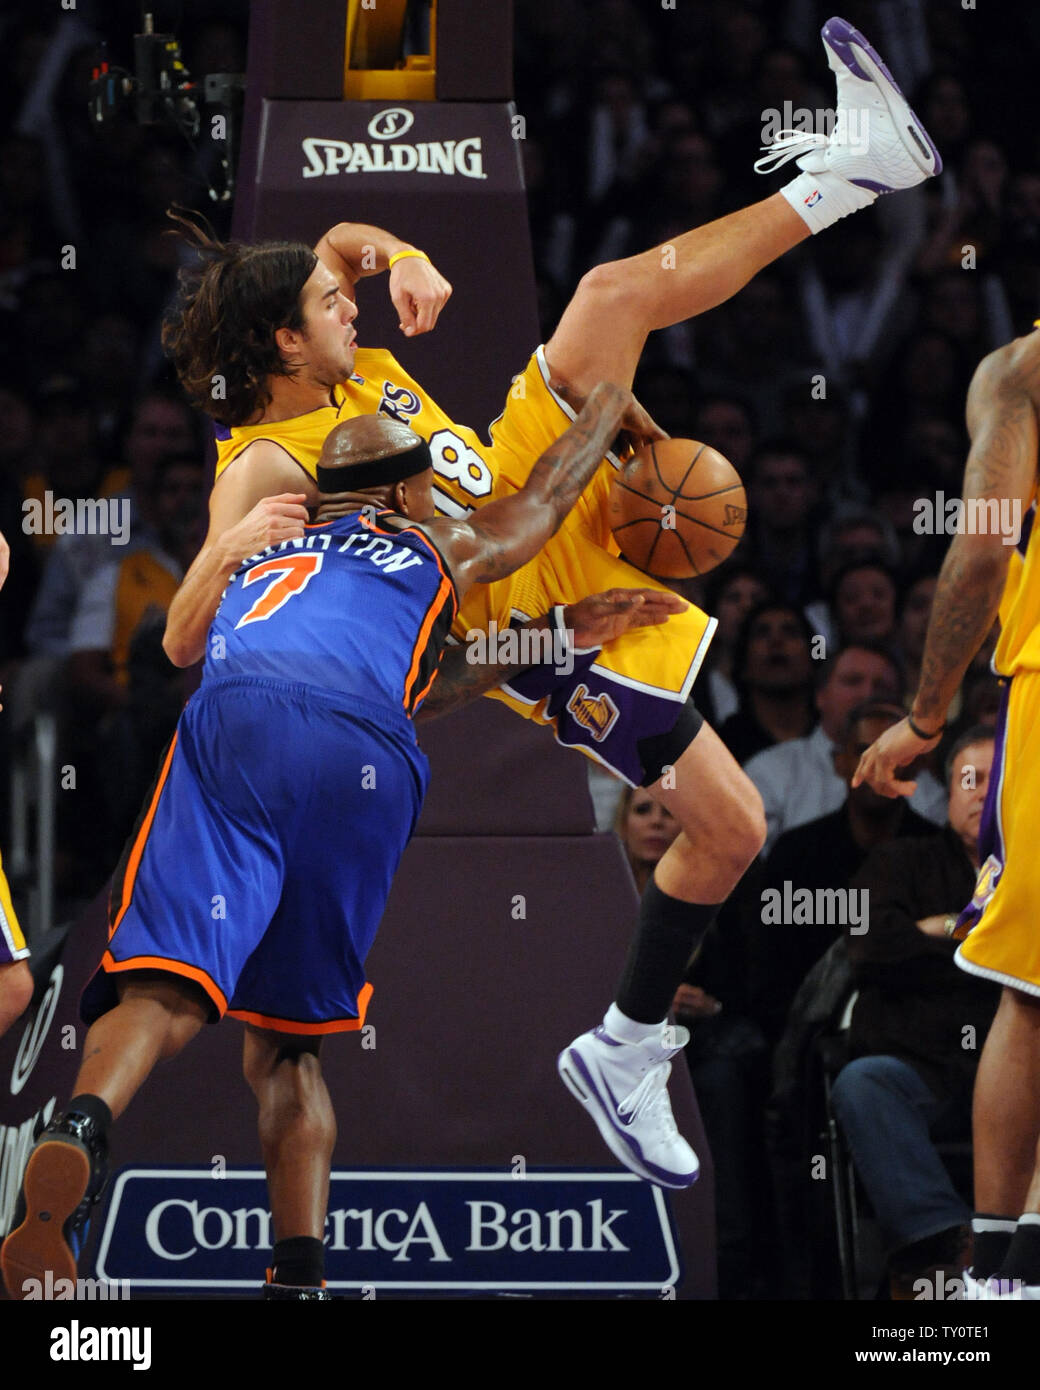 New York Knicks'  Al Harrington (L) is fouled hard by Los Angeles Lakers' Sasha Vujacic  during second half action at Staples Center in Los Angeles on December 16, 2008. The Lakers beat the Knicks 116-114.  (UPI Photo/Jon SooHoo) Stock Photo